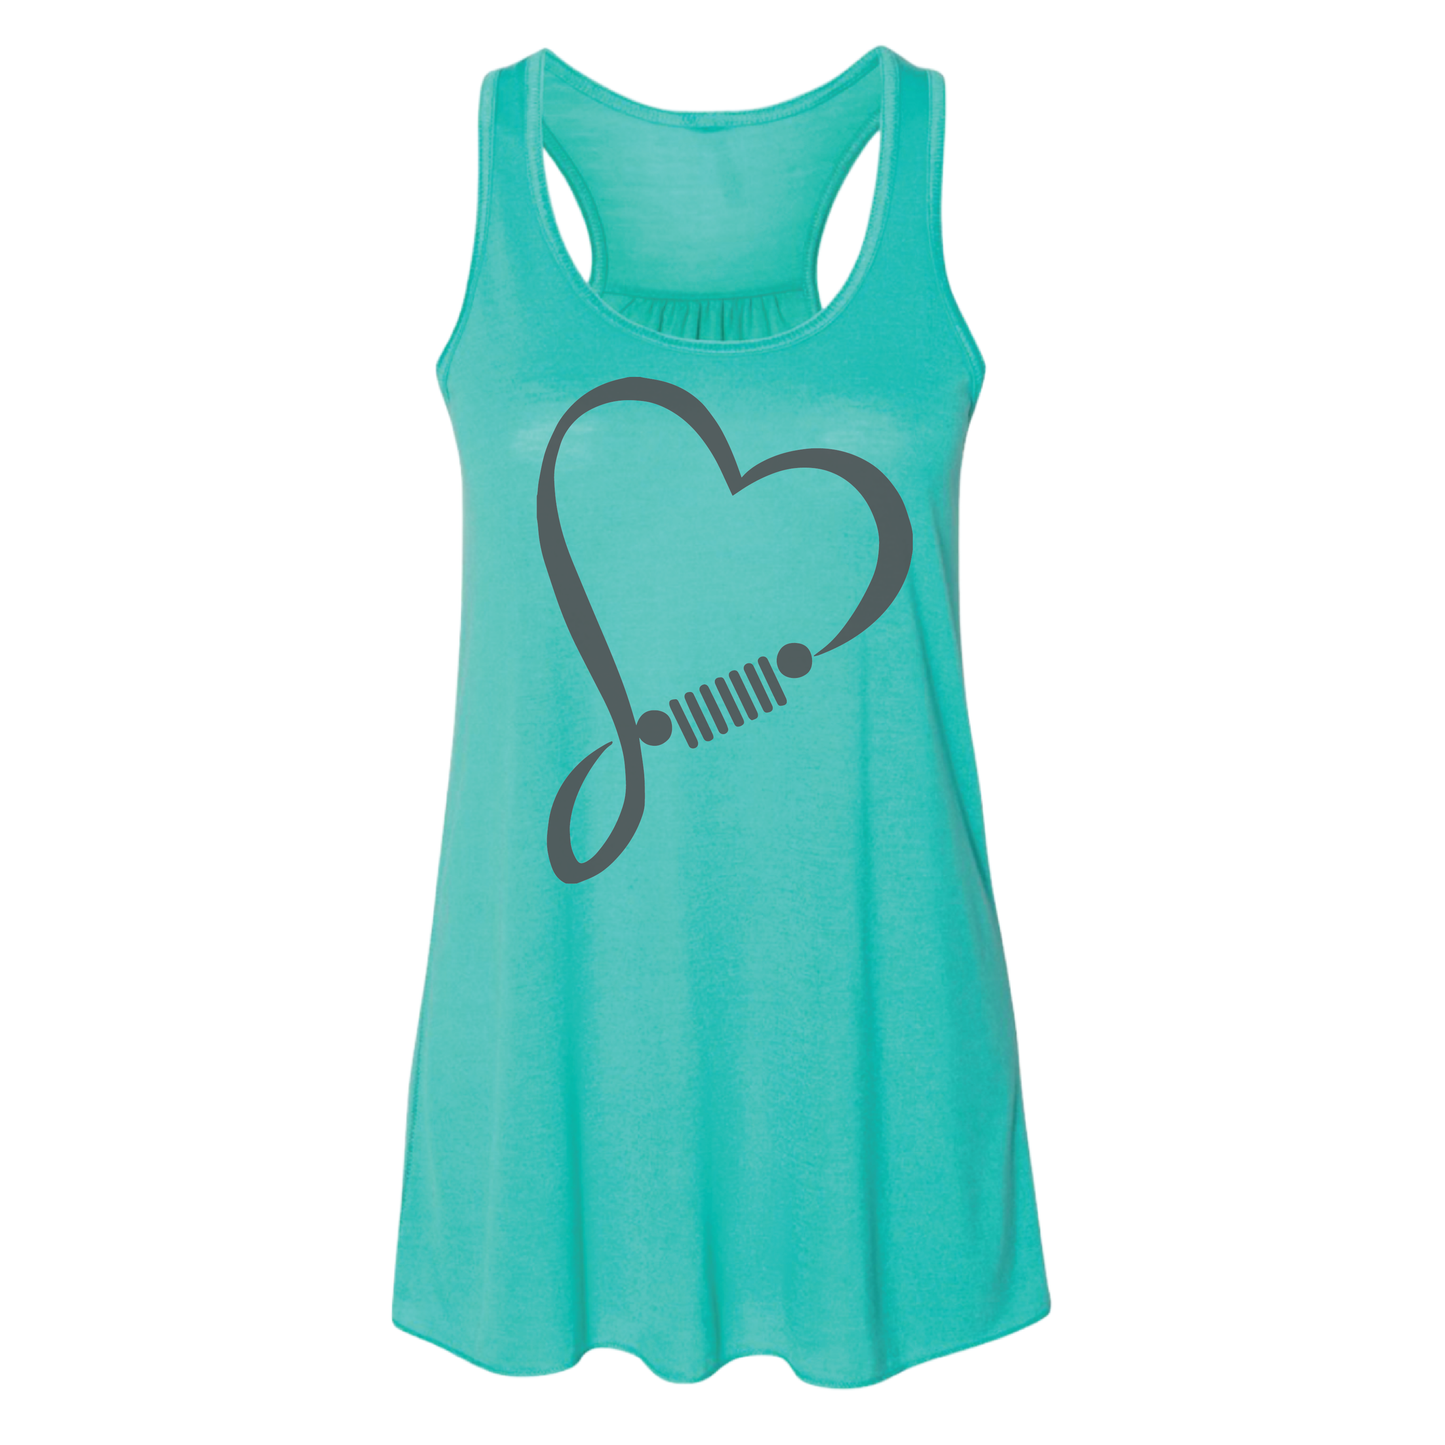 SSS Heart - Available in Multiple Colors & Styles